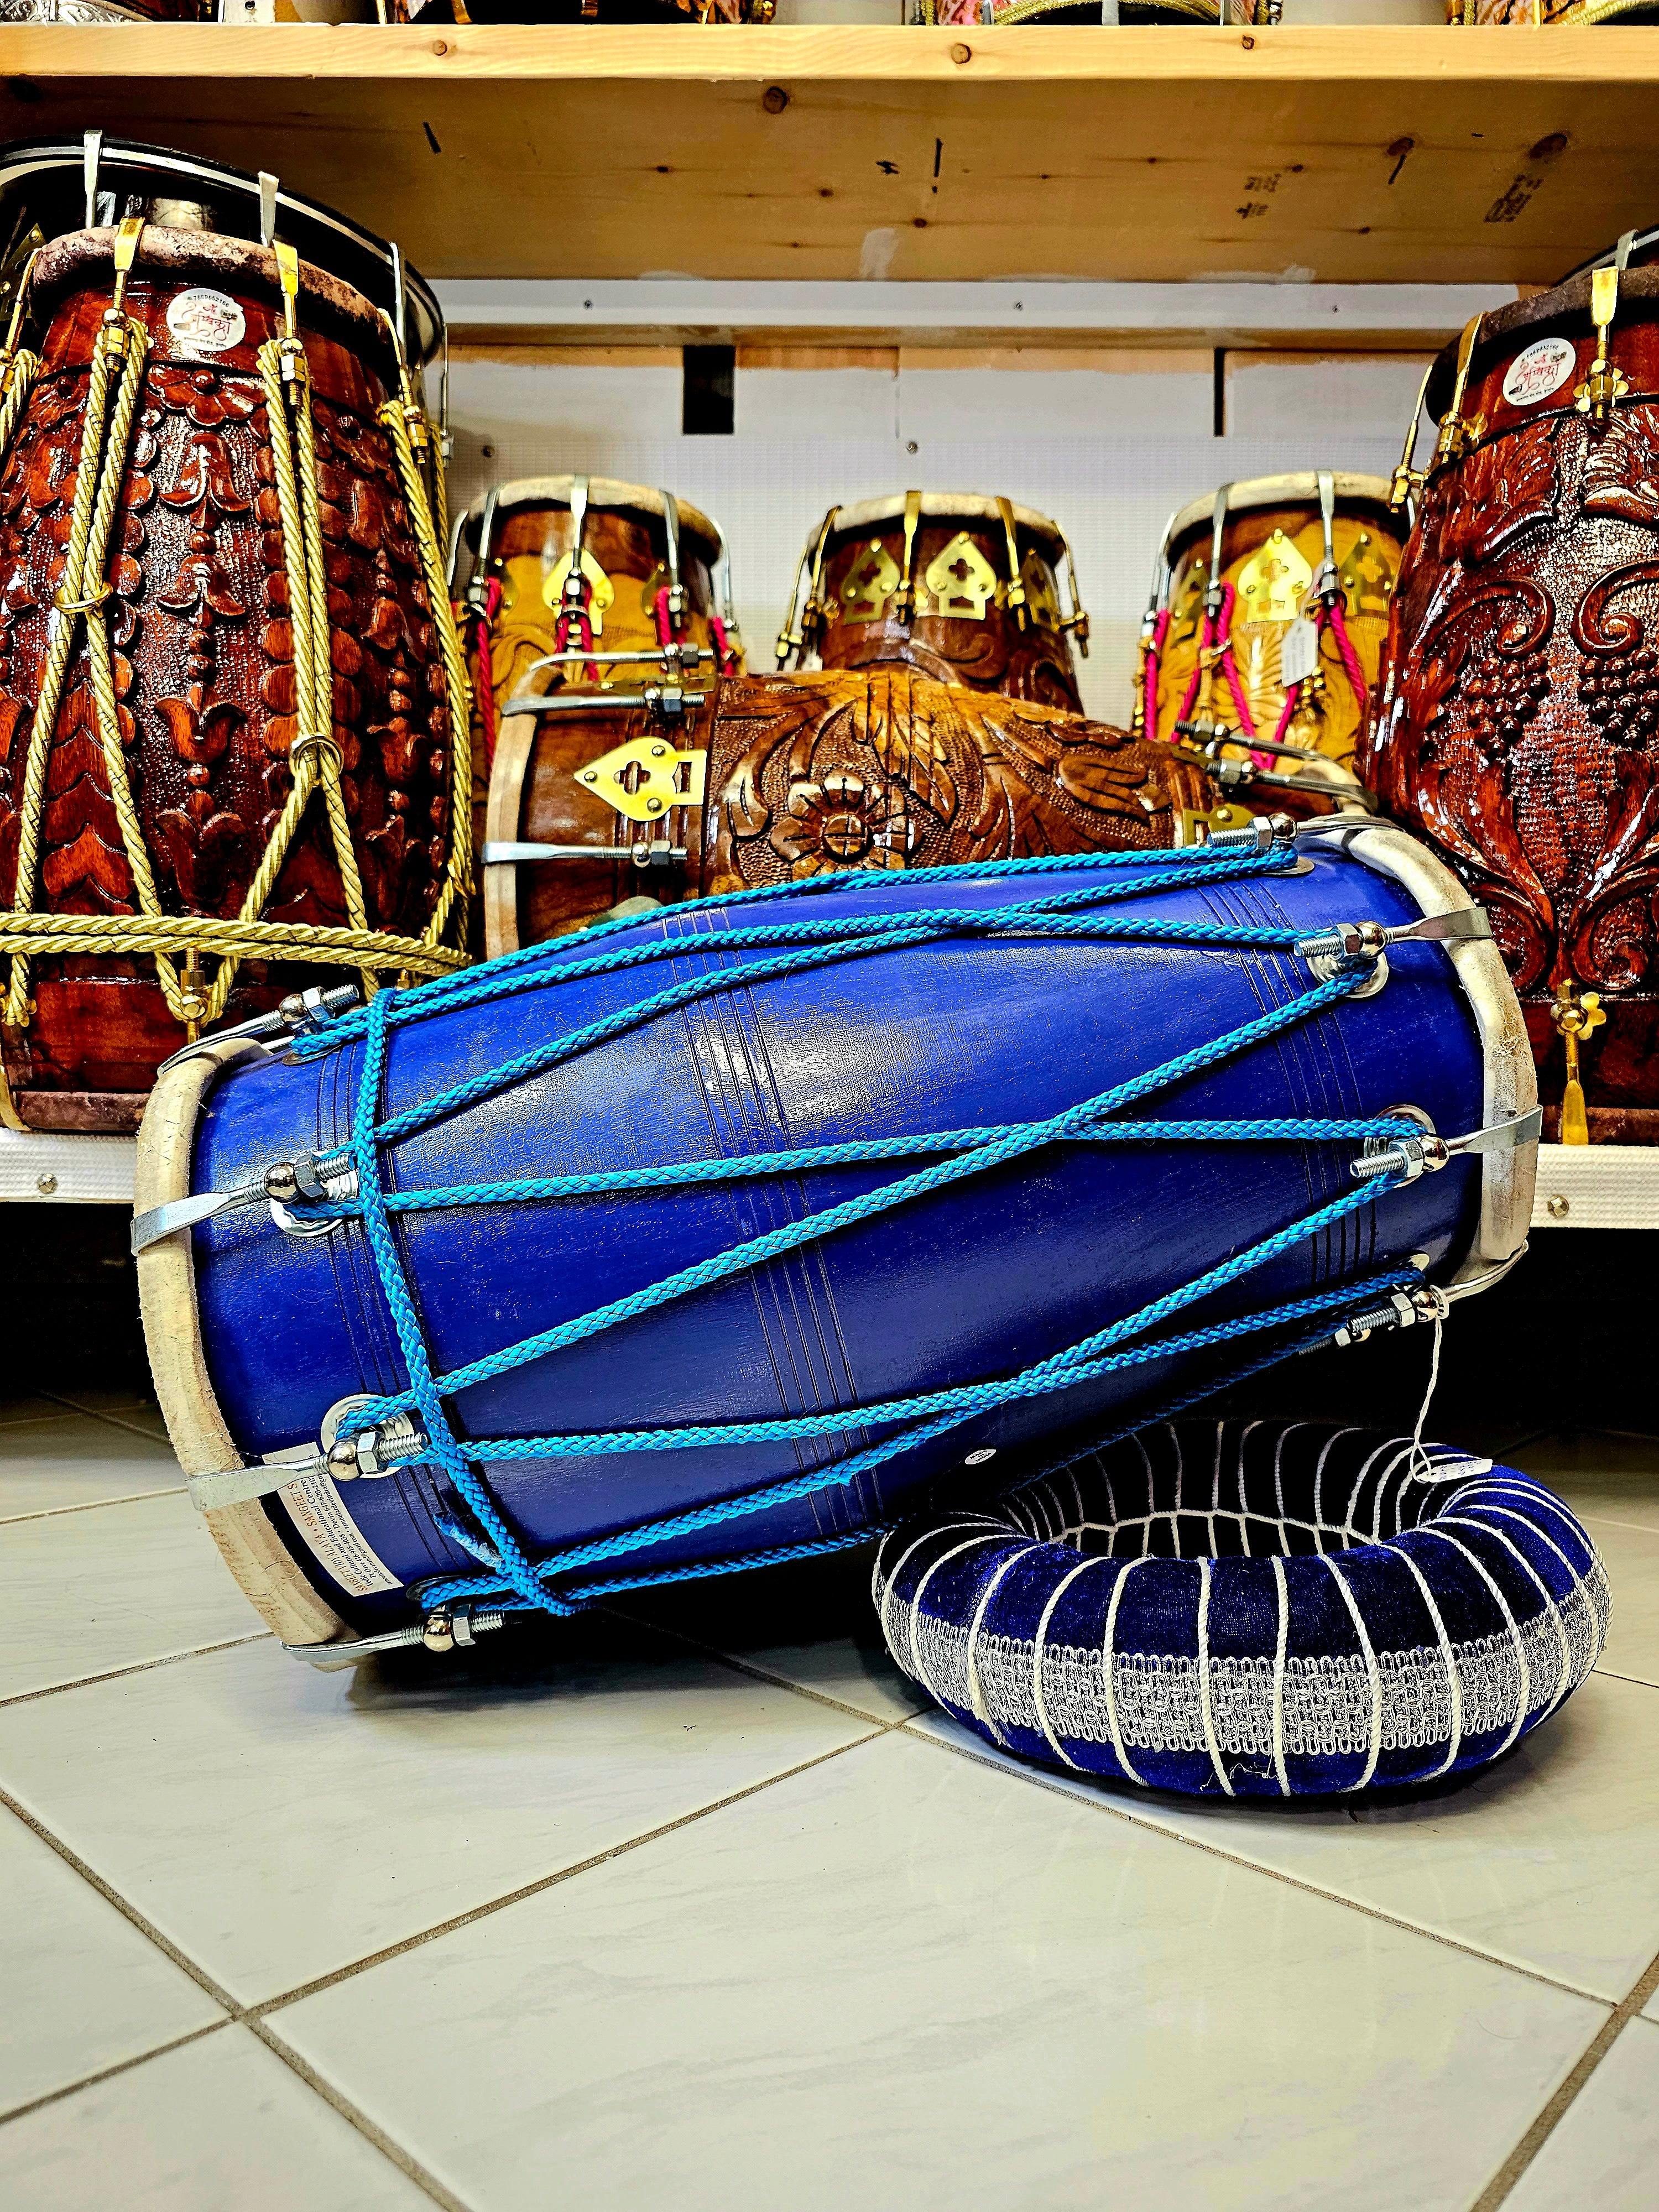 The Cobalt Crescendo Pro Dholak - A Blue Professional Dholak with Chrome Bolts and Striking Blue Ropes Design!